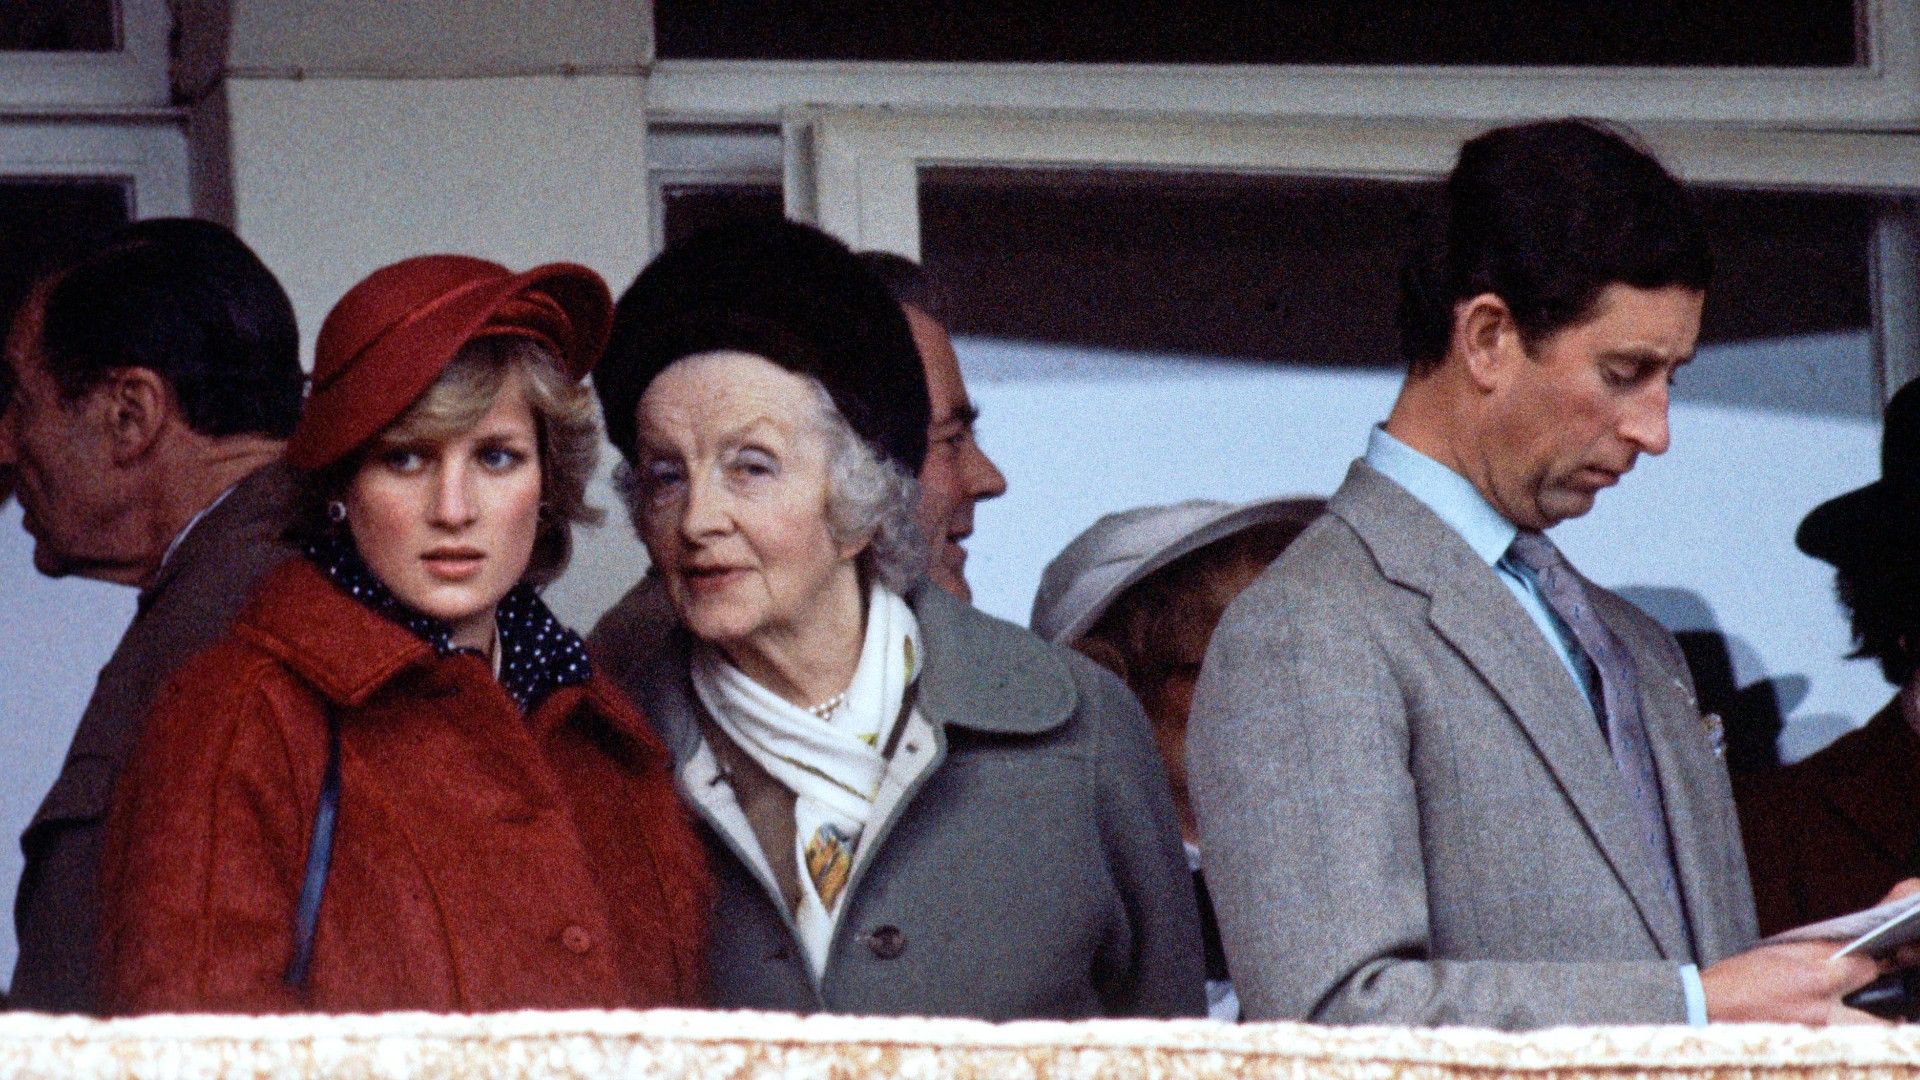 <p>                     The Spencers have always had a close connection to the royal family, and two of Princess Diana’s direct descendants actually had a working role within the royal household years before Diana was even born.                   </p>                                      <p>                     Her grandmothers, Cynthia Spencer, Countess Spencer, and Ruth Roche, Baroness Fermoy, worked for many years as ladies-in-waiting to none other than Queen Elizabeth The Queen Mother, the woman who would go on to become Diana’s grandmother-in-law. Both women remained in their positions until the death of the Queen Mother in 2002.                   </p>